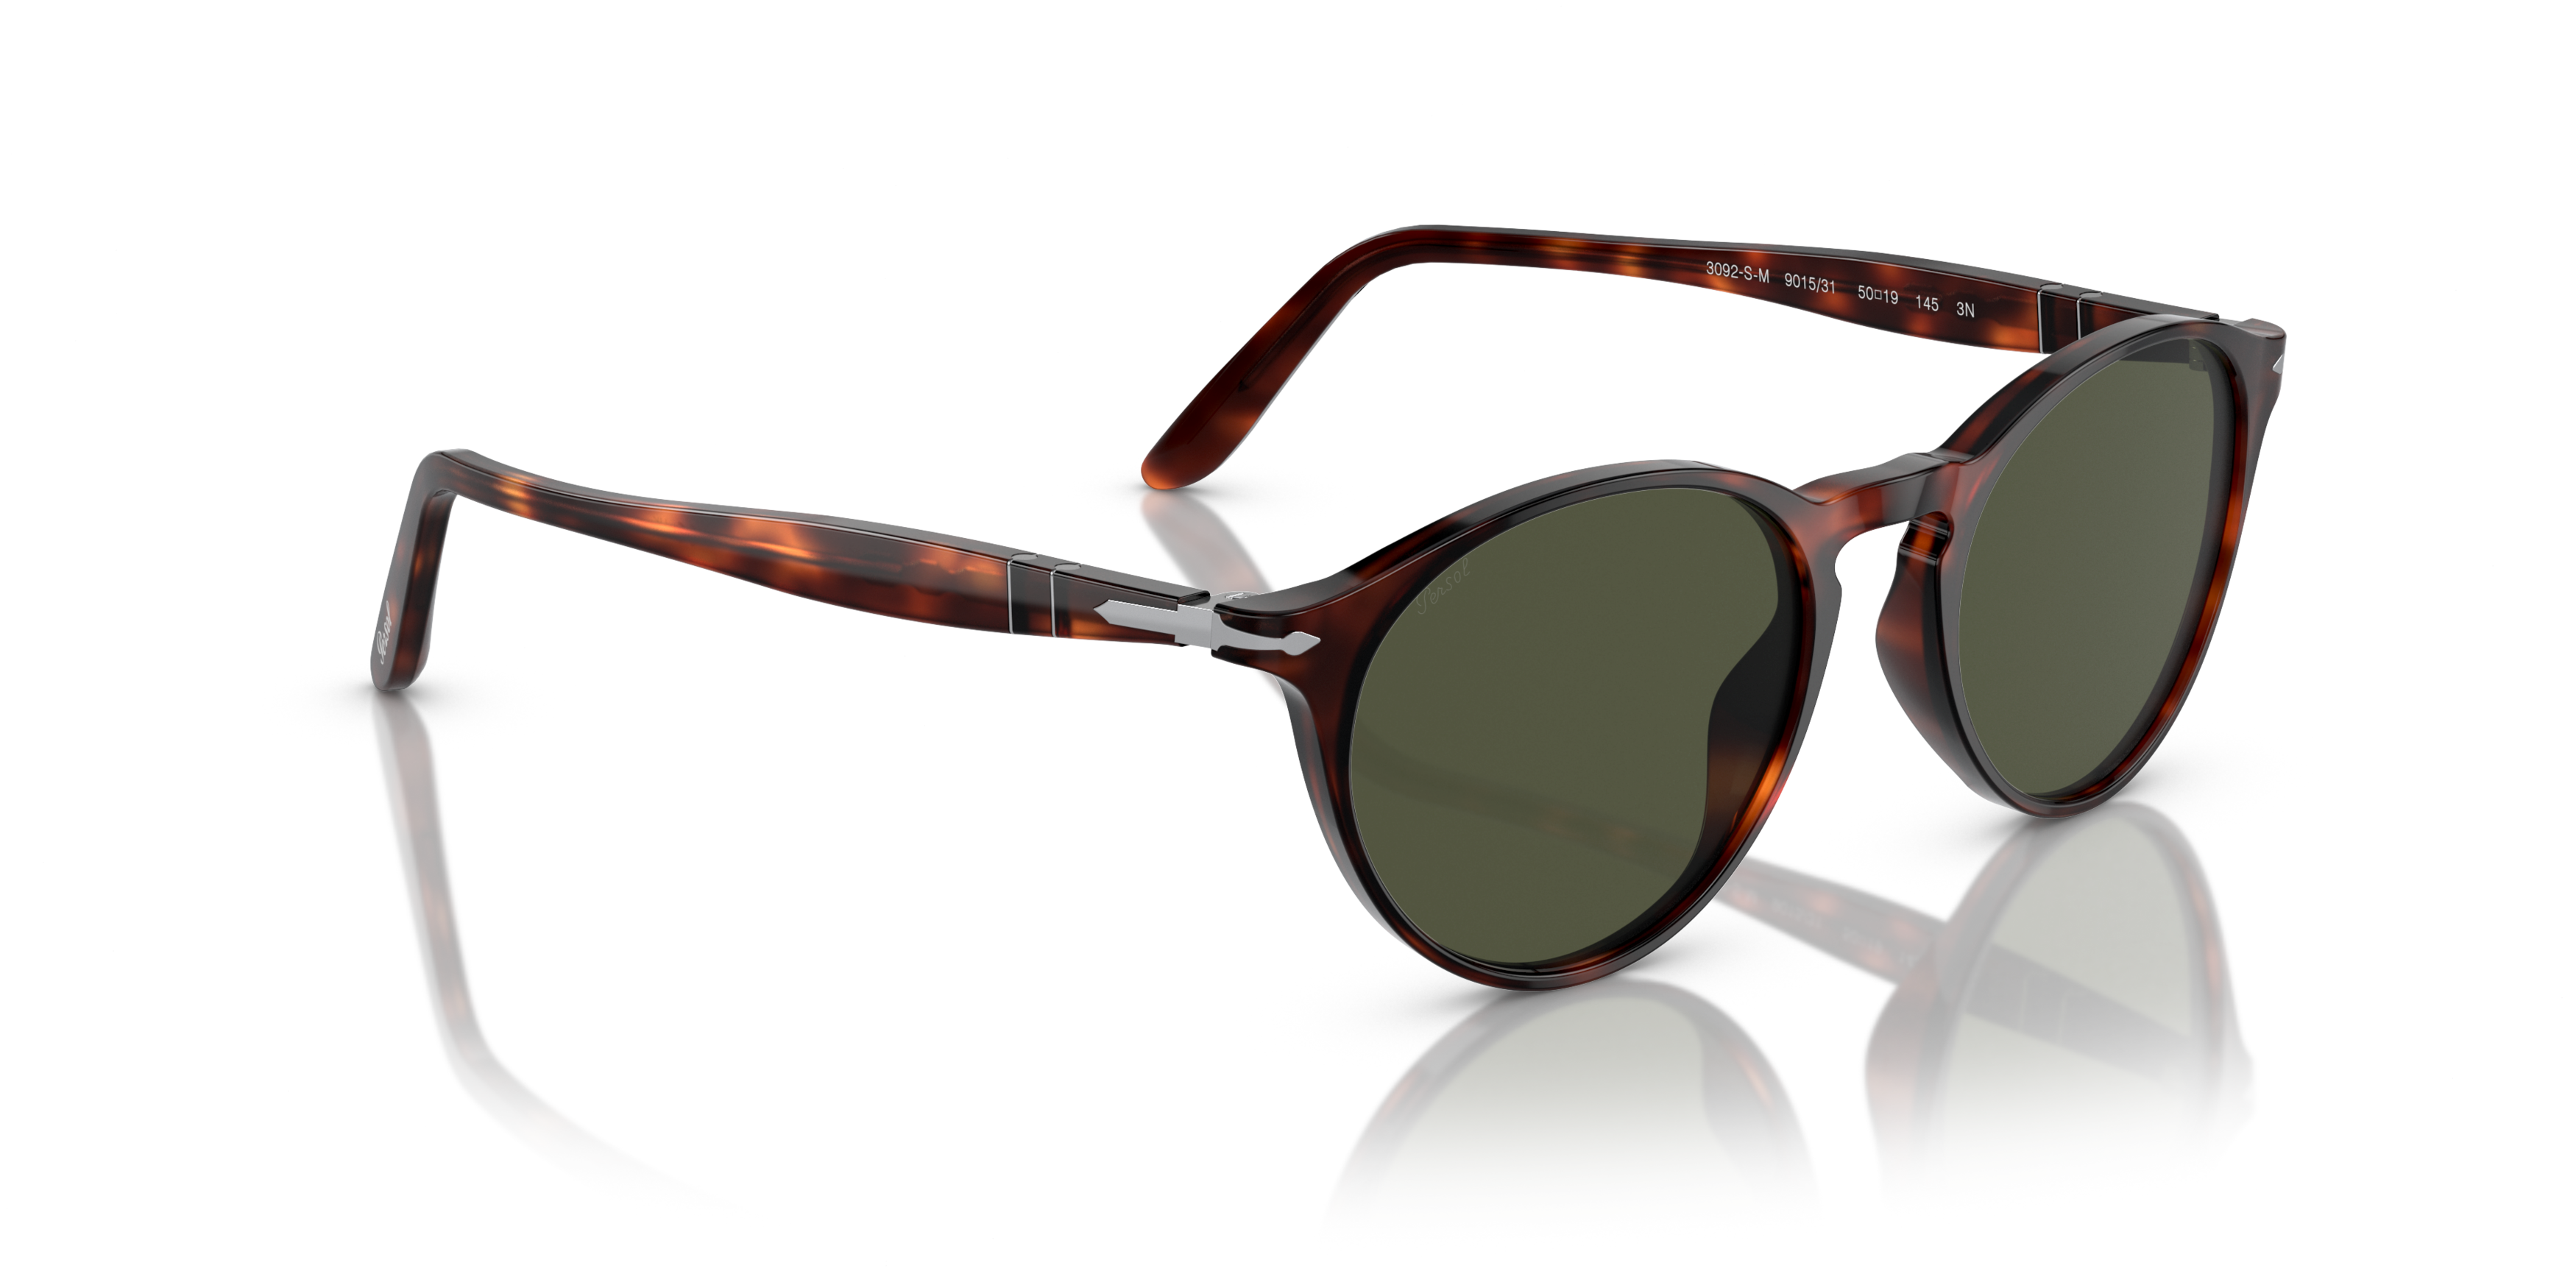 [products.image.angle_right01] Persol 0PO3092SM 901531